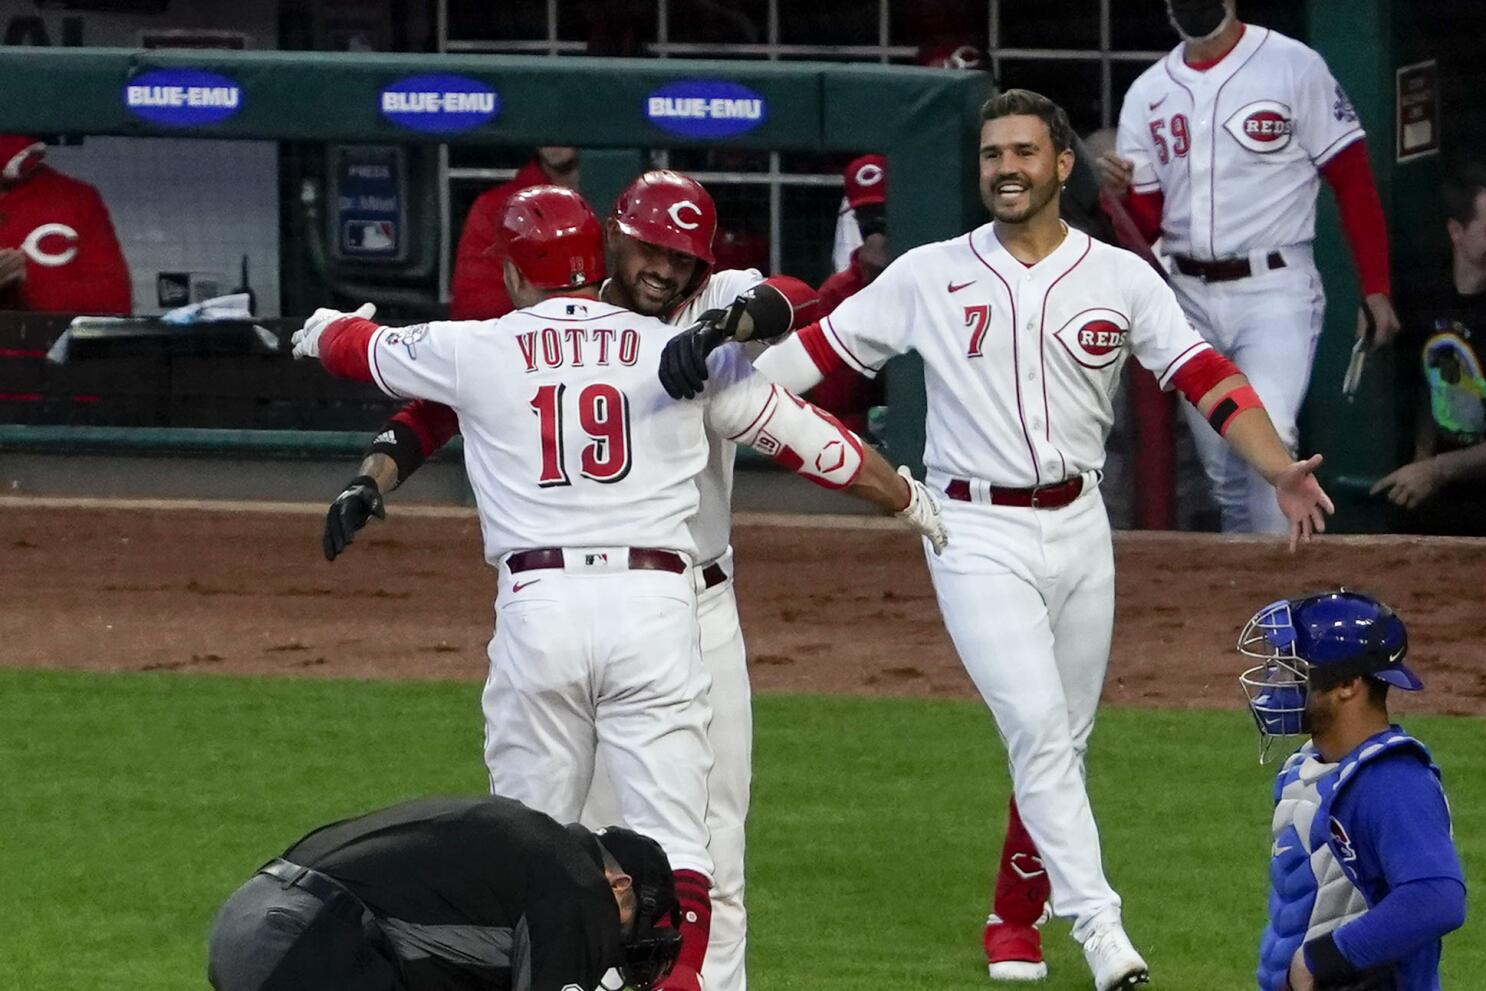 Joey Votto top career moments